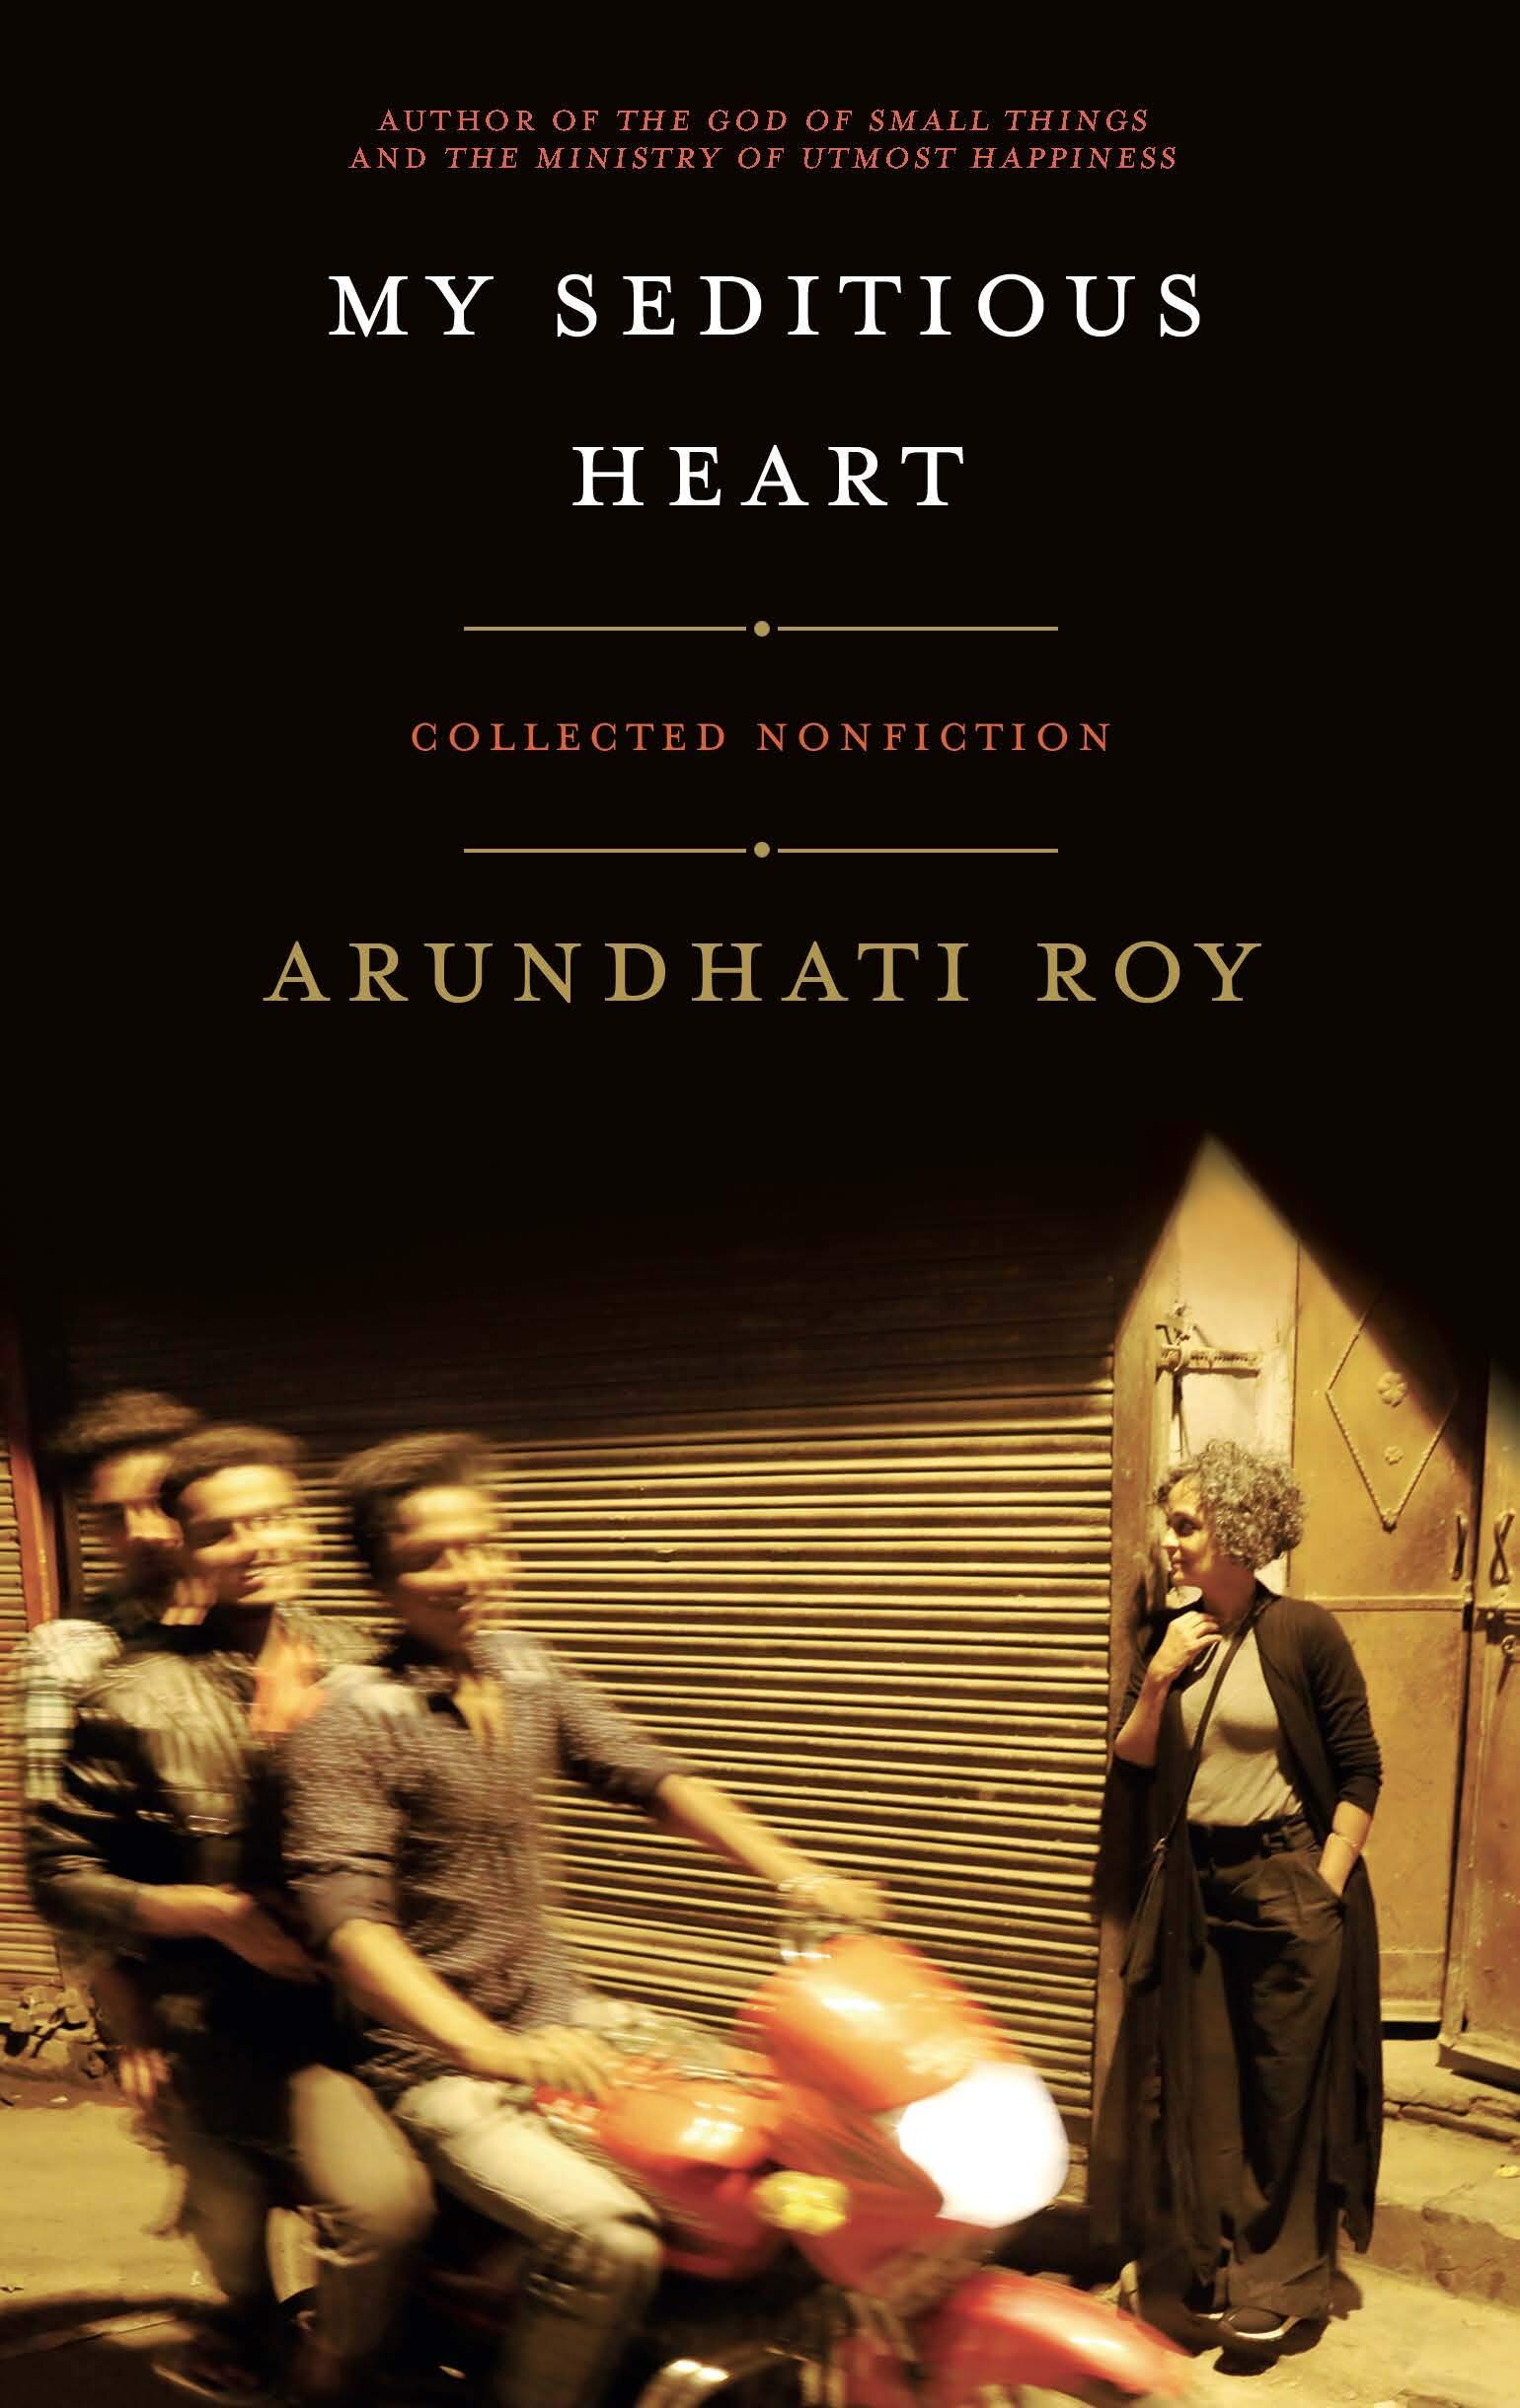 Reprints My Seditious Heart by Arundhati Roy collected nonfiction.jpg